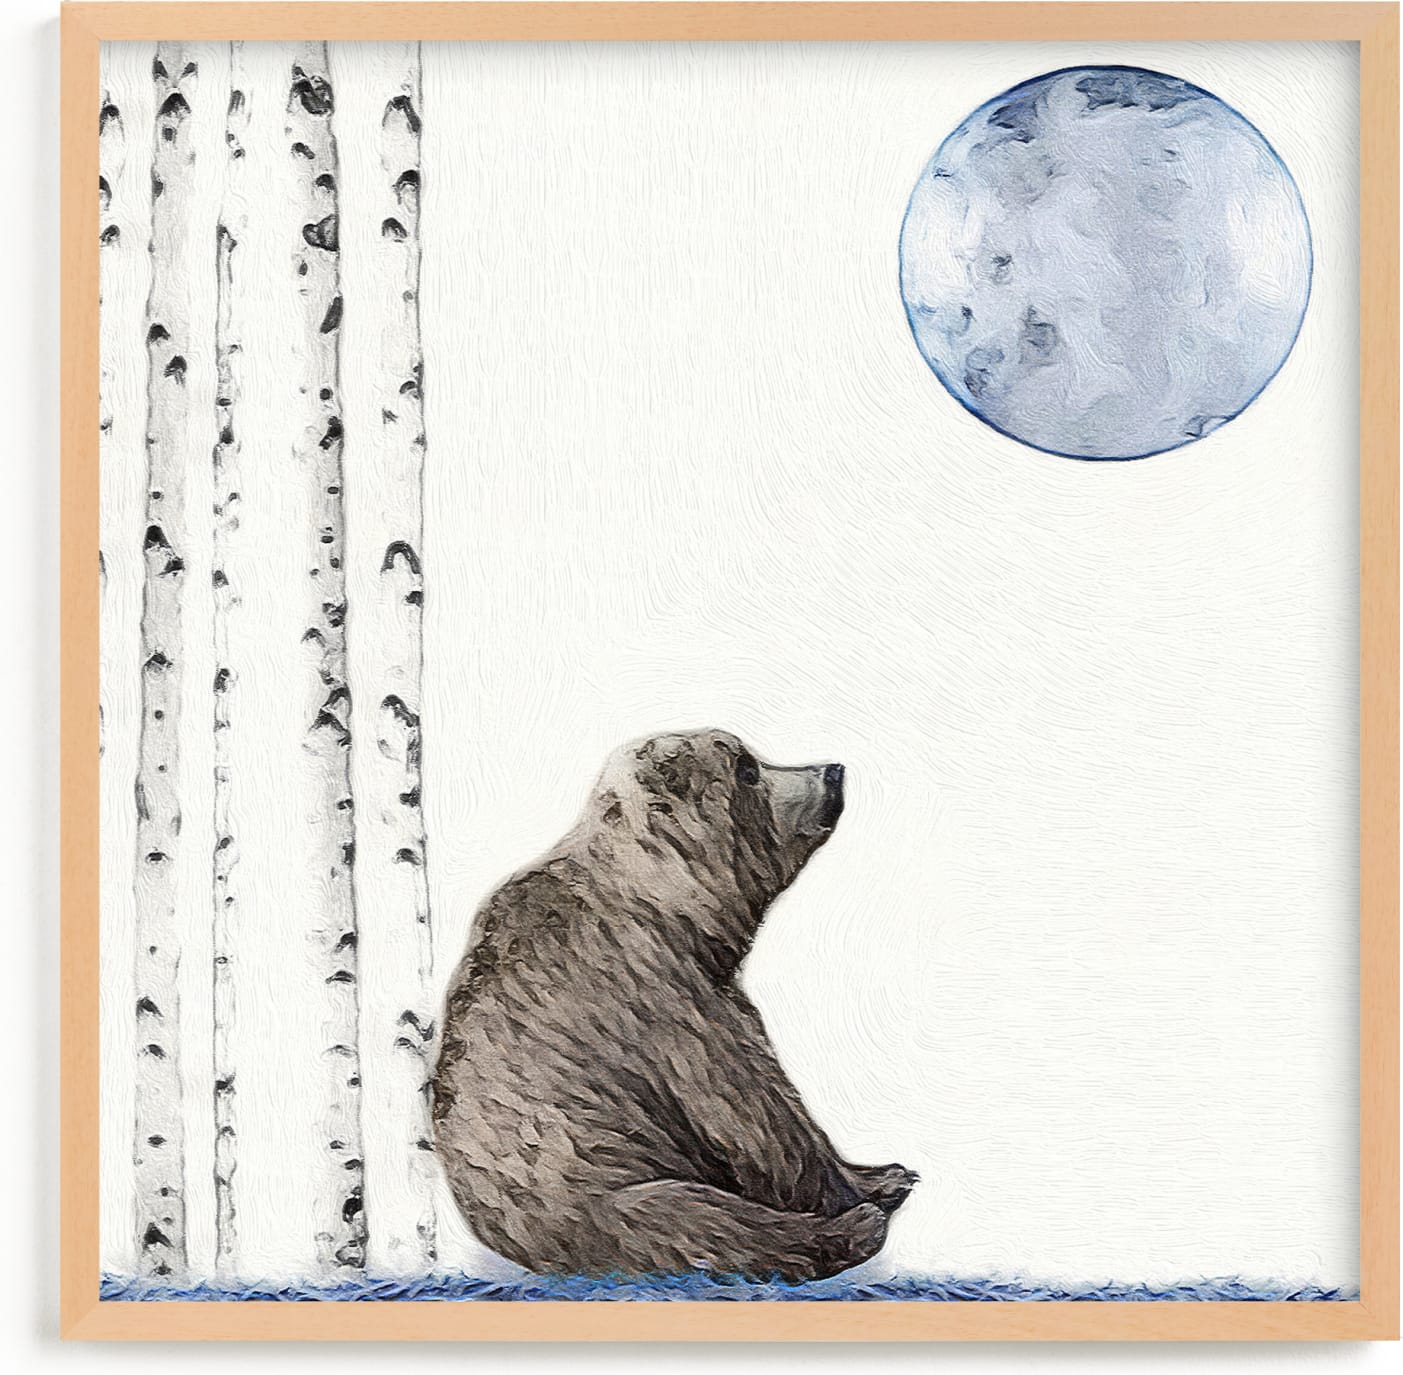 This is a blue kids wall art by Maja Cunningham called Once upon a blue moon.